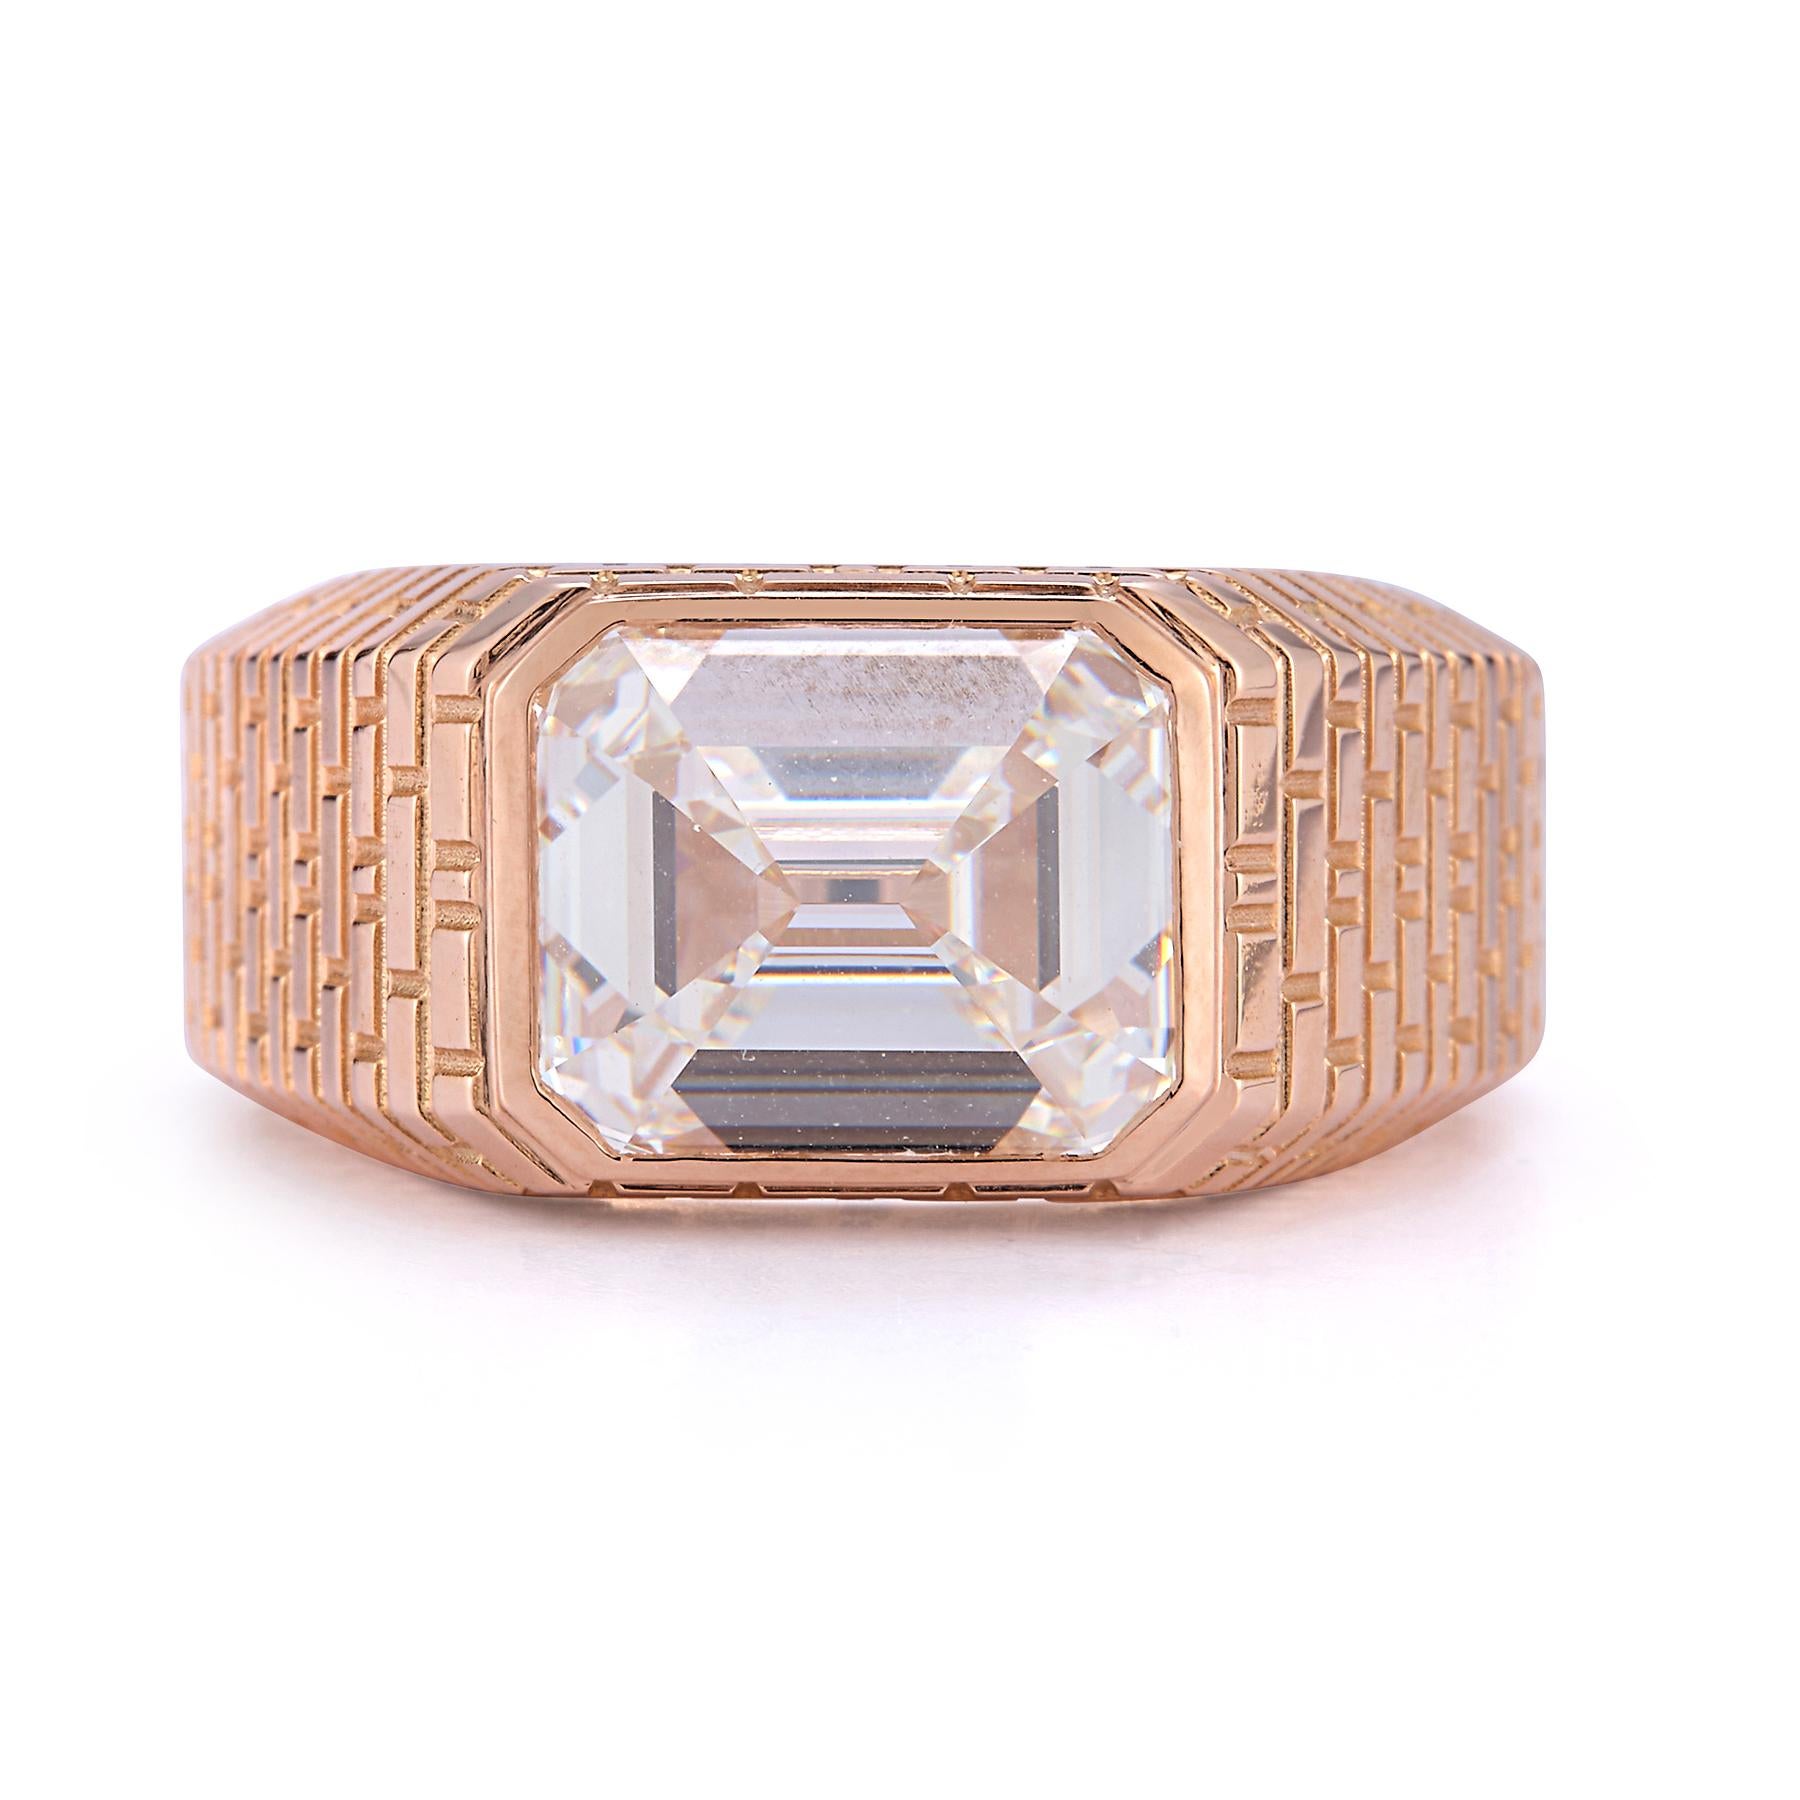 6.04 carat Reverse Set Emerald Cut Diamond Pyramid Ring

GIA Certificate stating the emerald cut diamond weighs 6.04 carats, J color and VVS1 clarity.

Mounted in 18 karat rose gold

One of our favorite creations: we took this 6 carat diamond out of